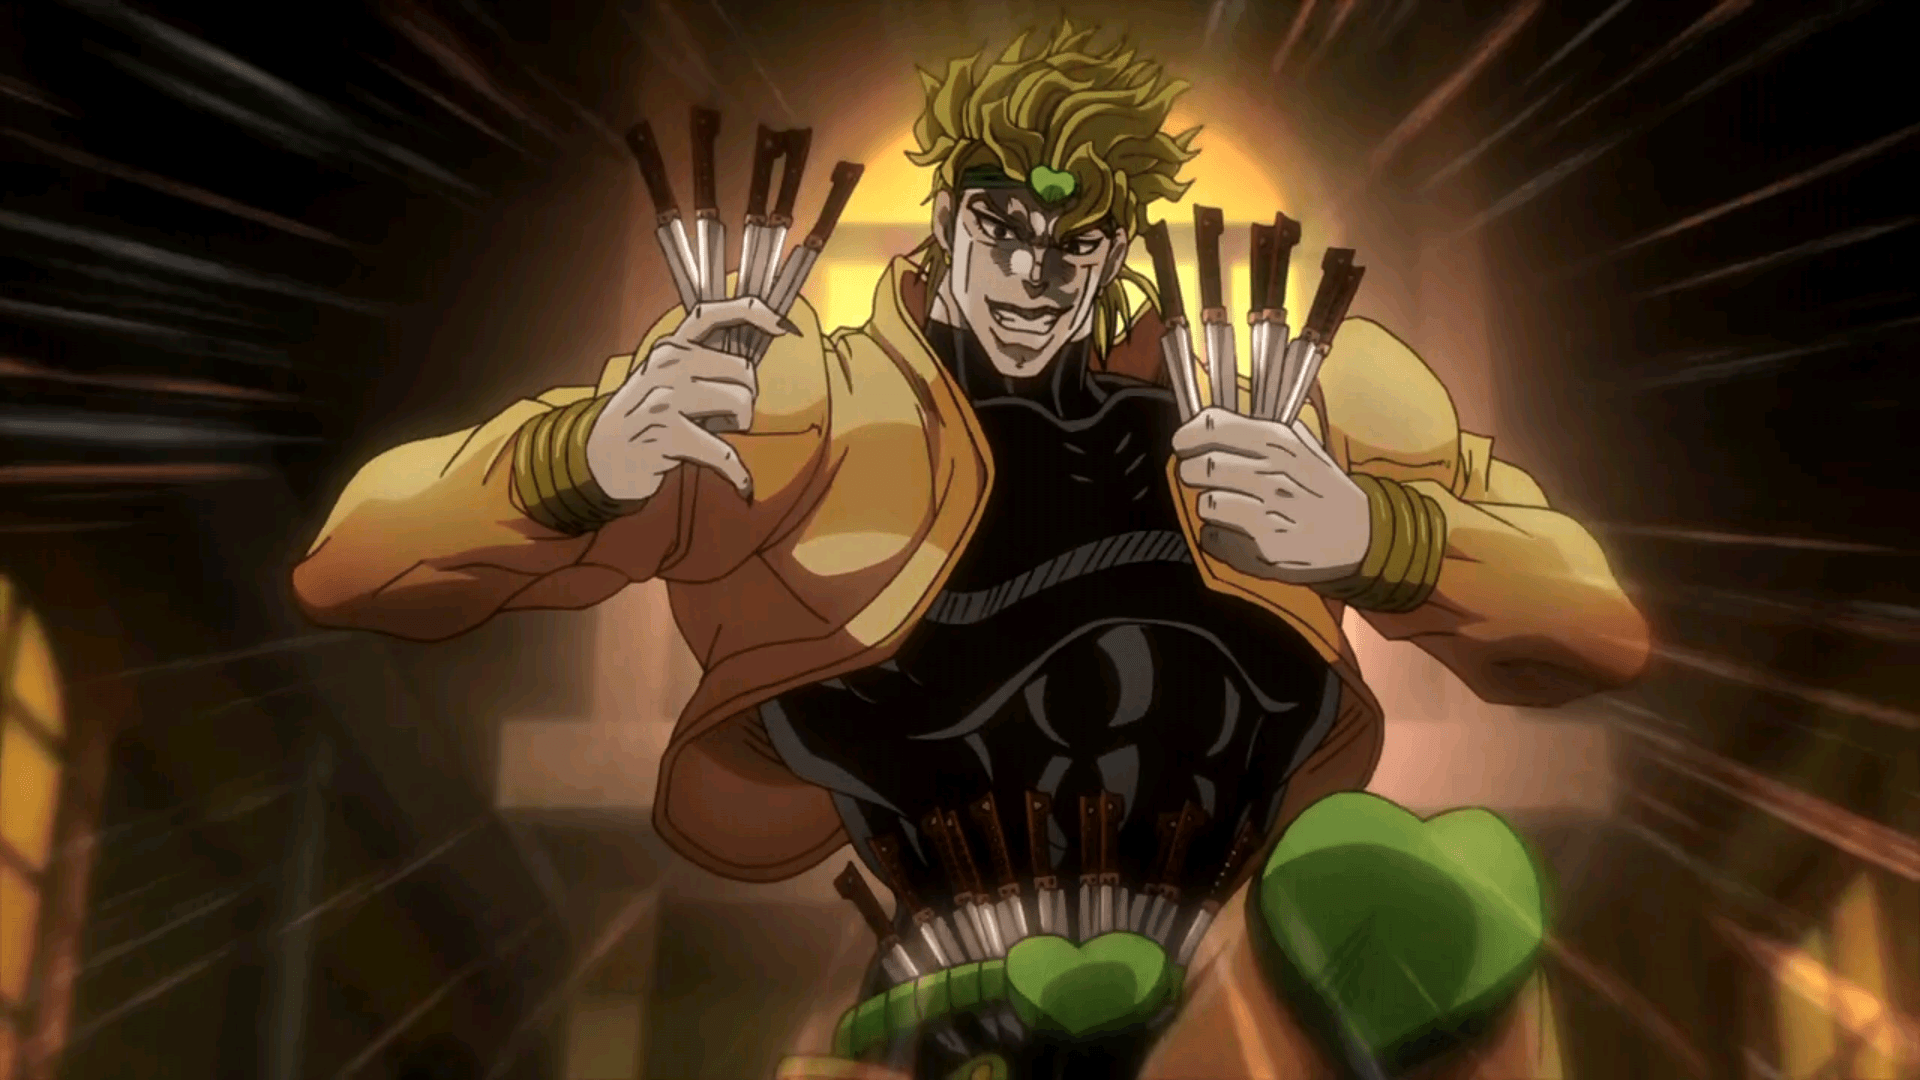 Look at all these f*cking knives!. JoJo's Bizarre Adventure. Know